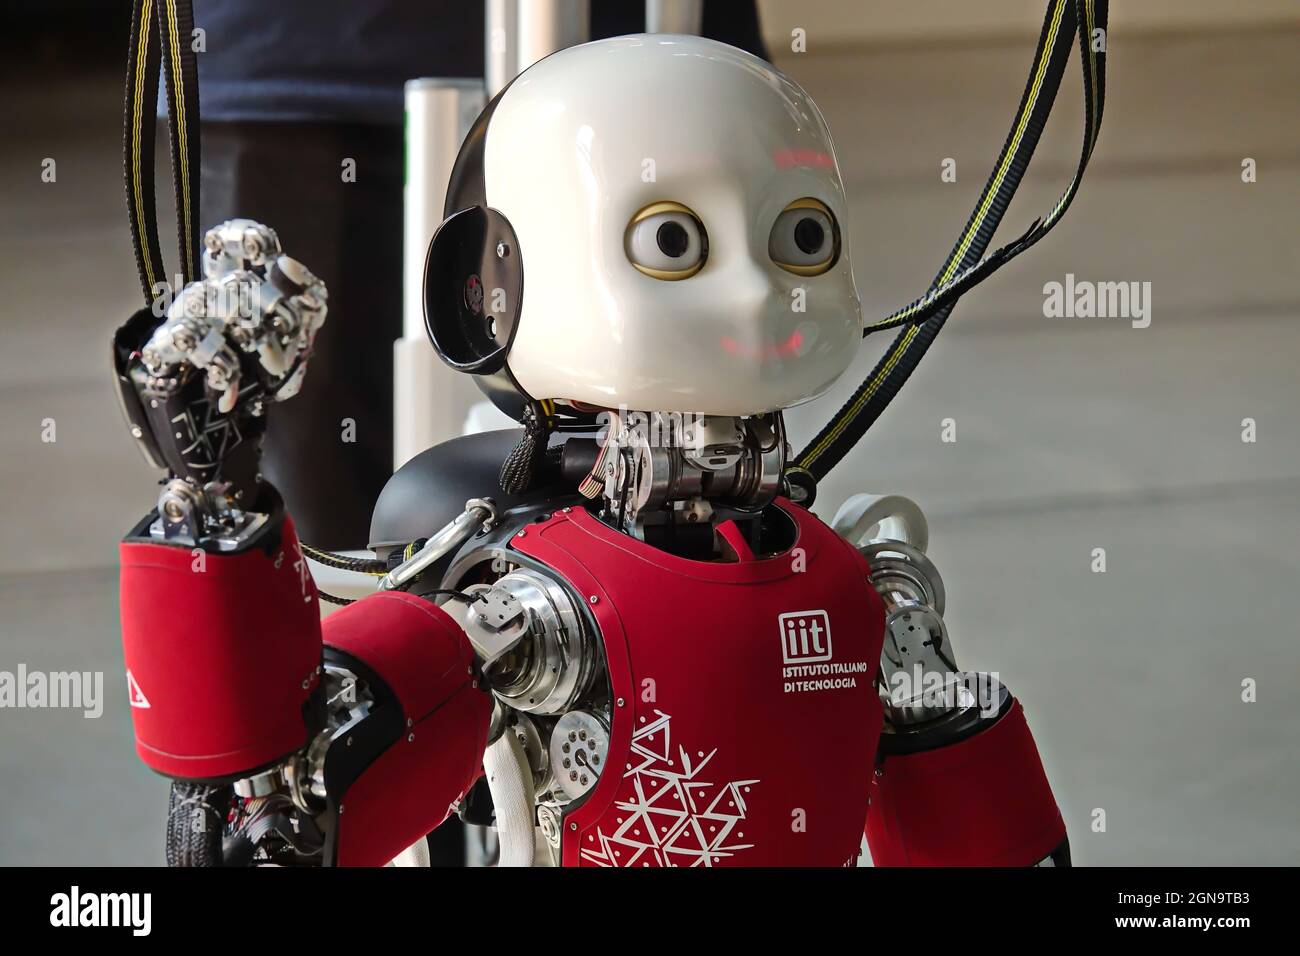 iCub, the small humanoid created by the Italian Institute of Technology. Genoa, Italy - September 2021 Stock Photo